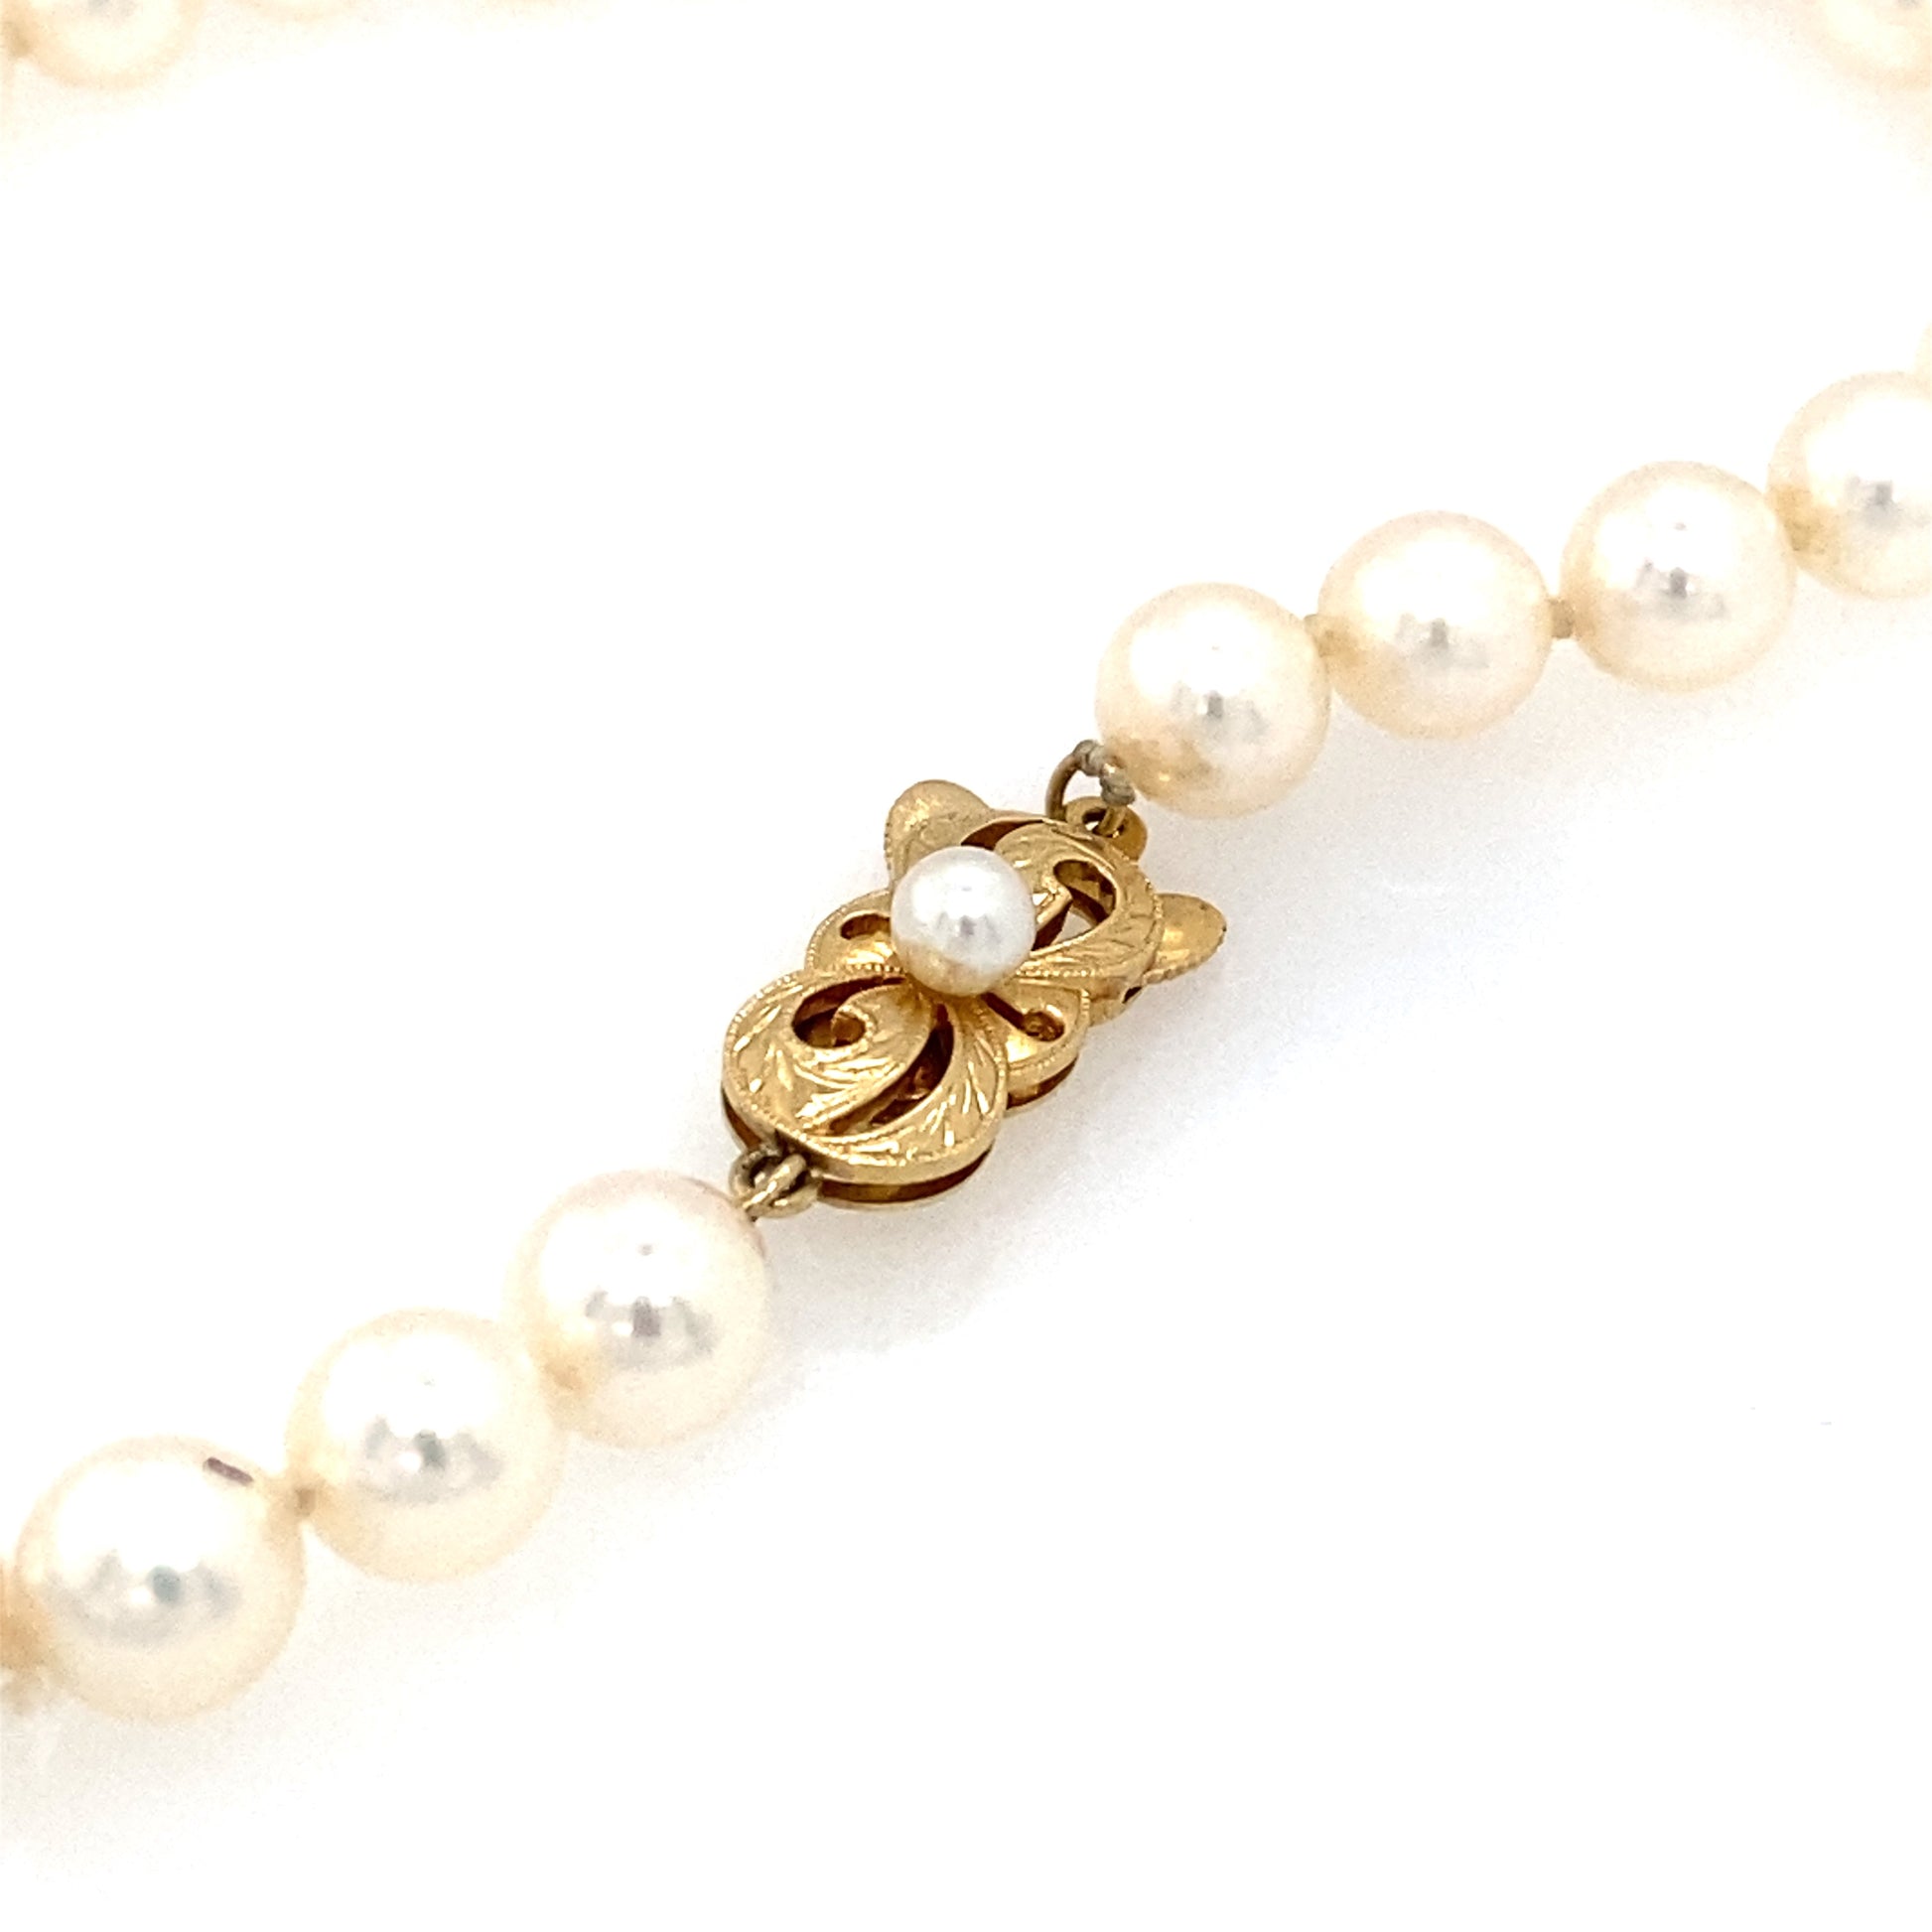 Mikimoto 6.5mm Pearl Necklace with 18K Gold Clasp – The Verma Group